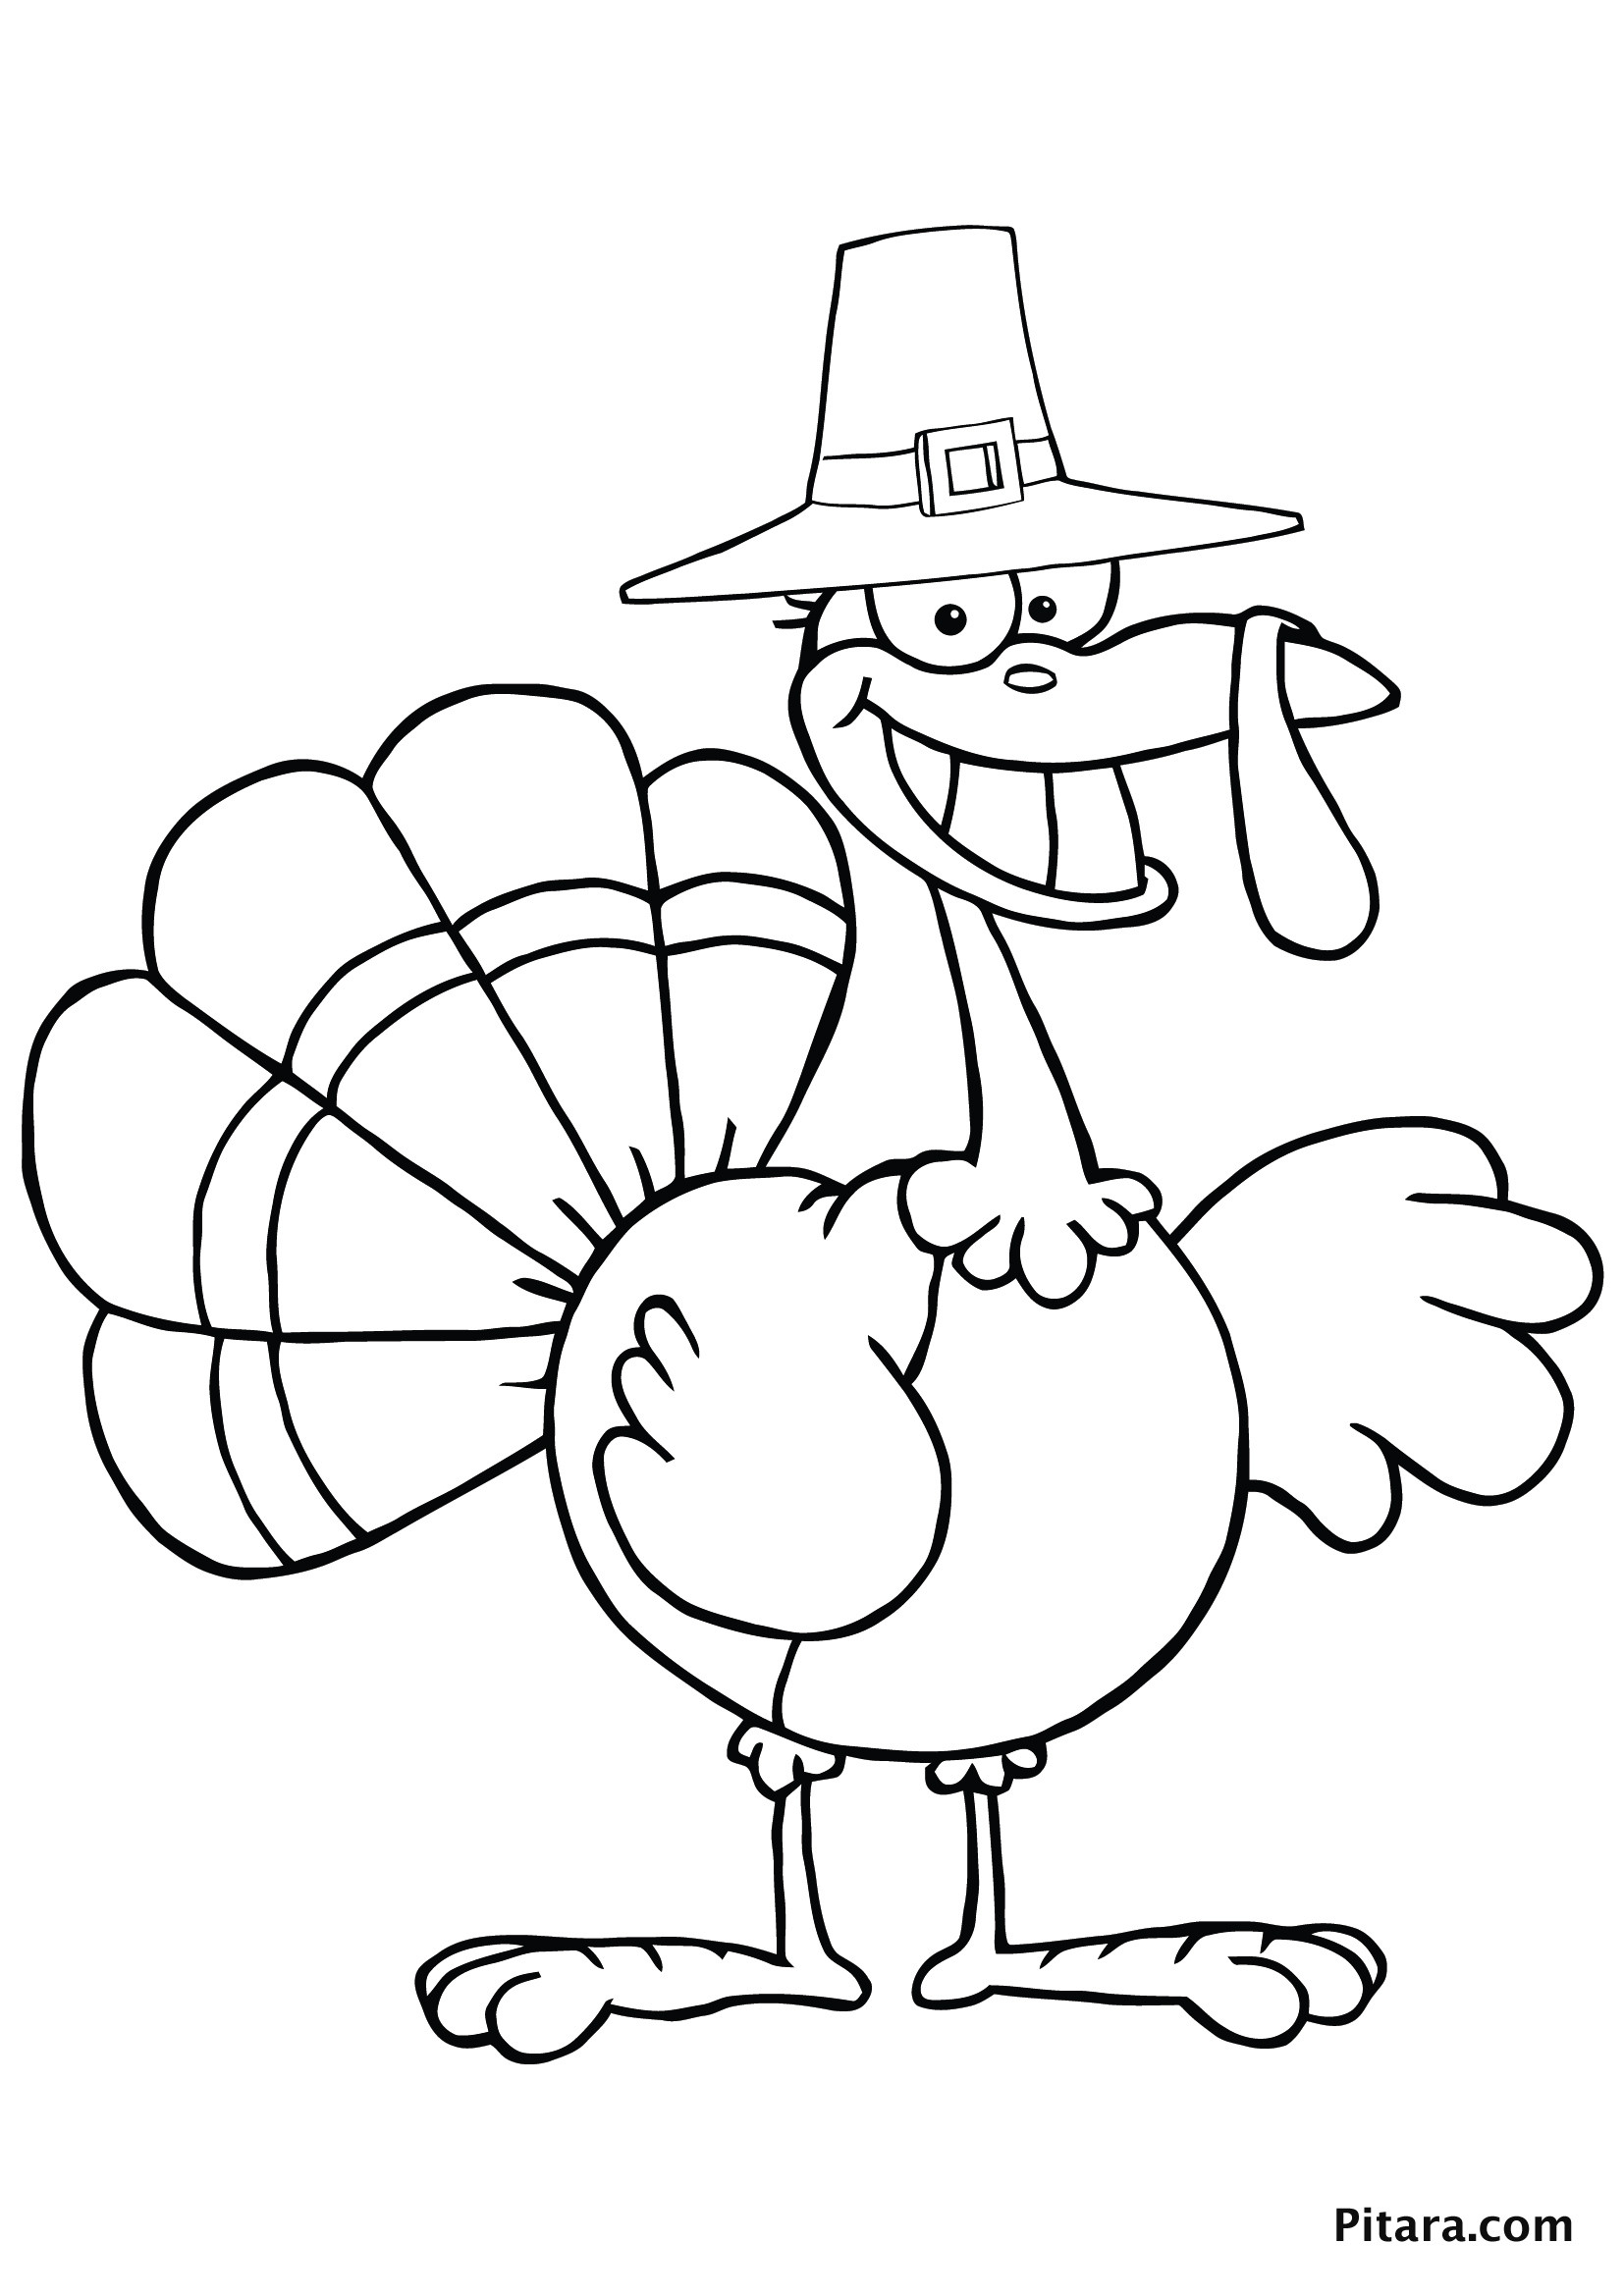 Thanksgiving Coloring Pages For Kids
 Turkey Coloring Pages for Kids